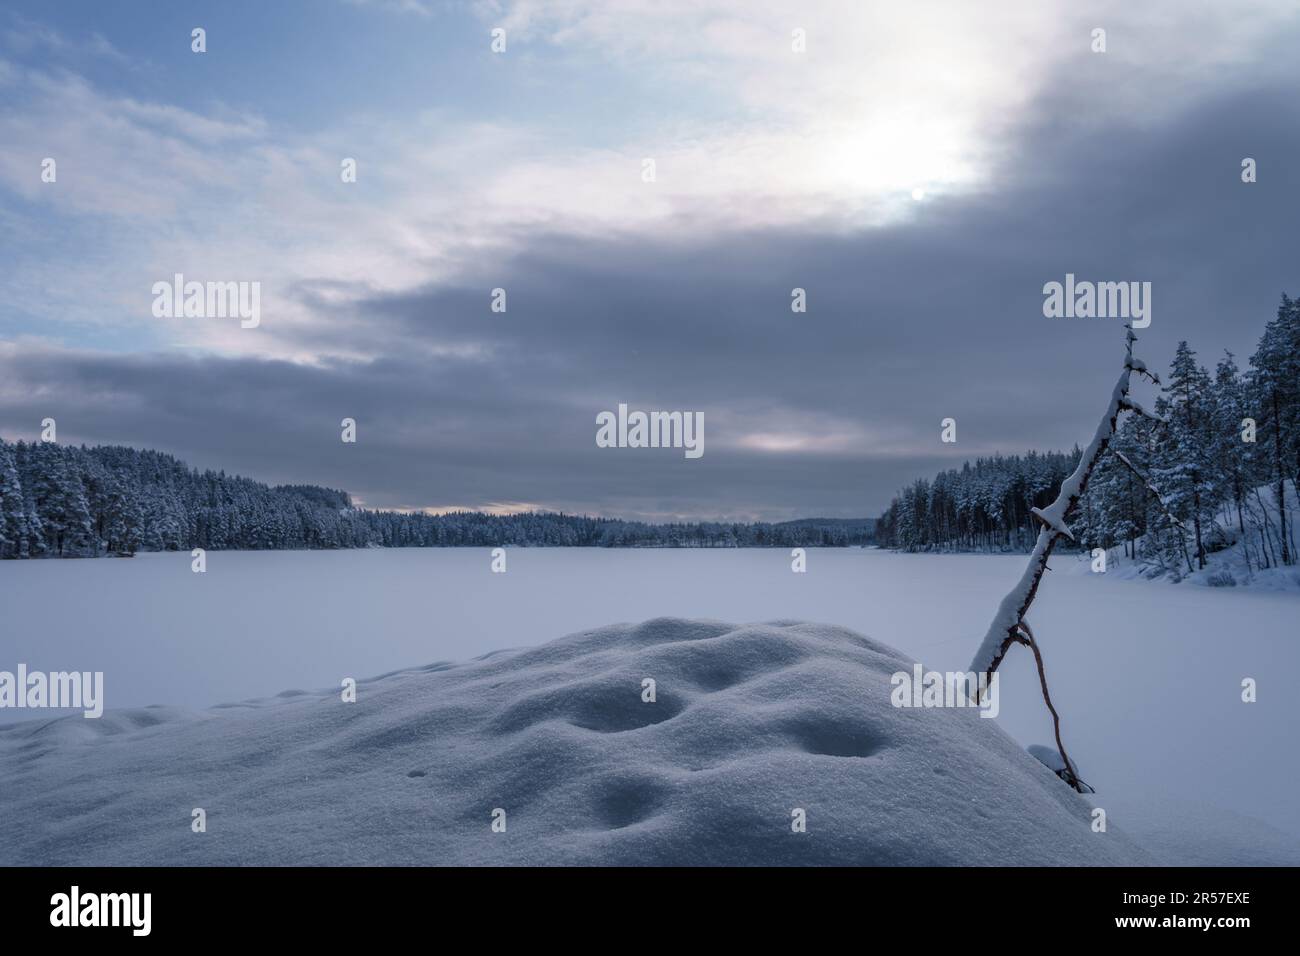 Blue calm winter landscape of a frozen lake and cloudy sky in Repovesi National Park, Kouvola, Finland. Stock Photo